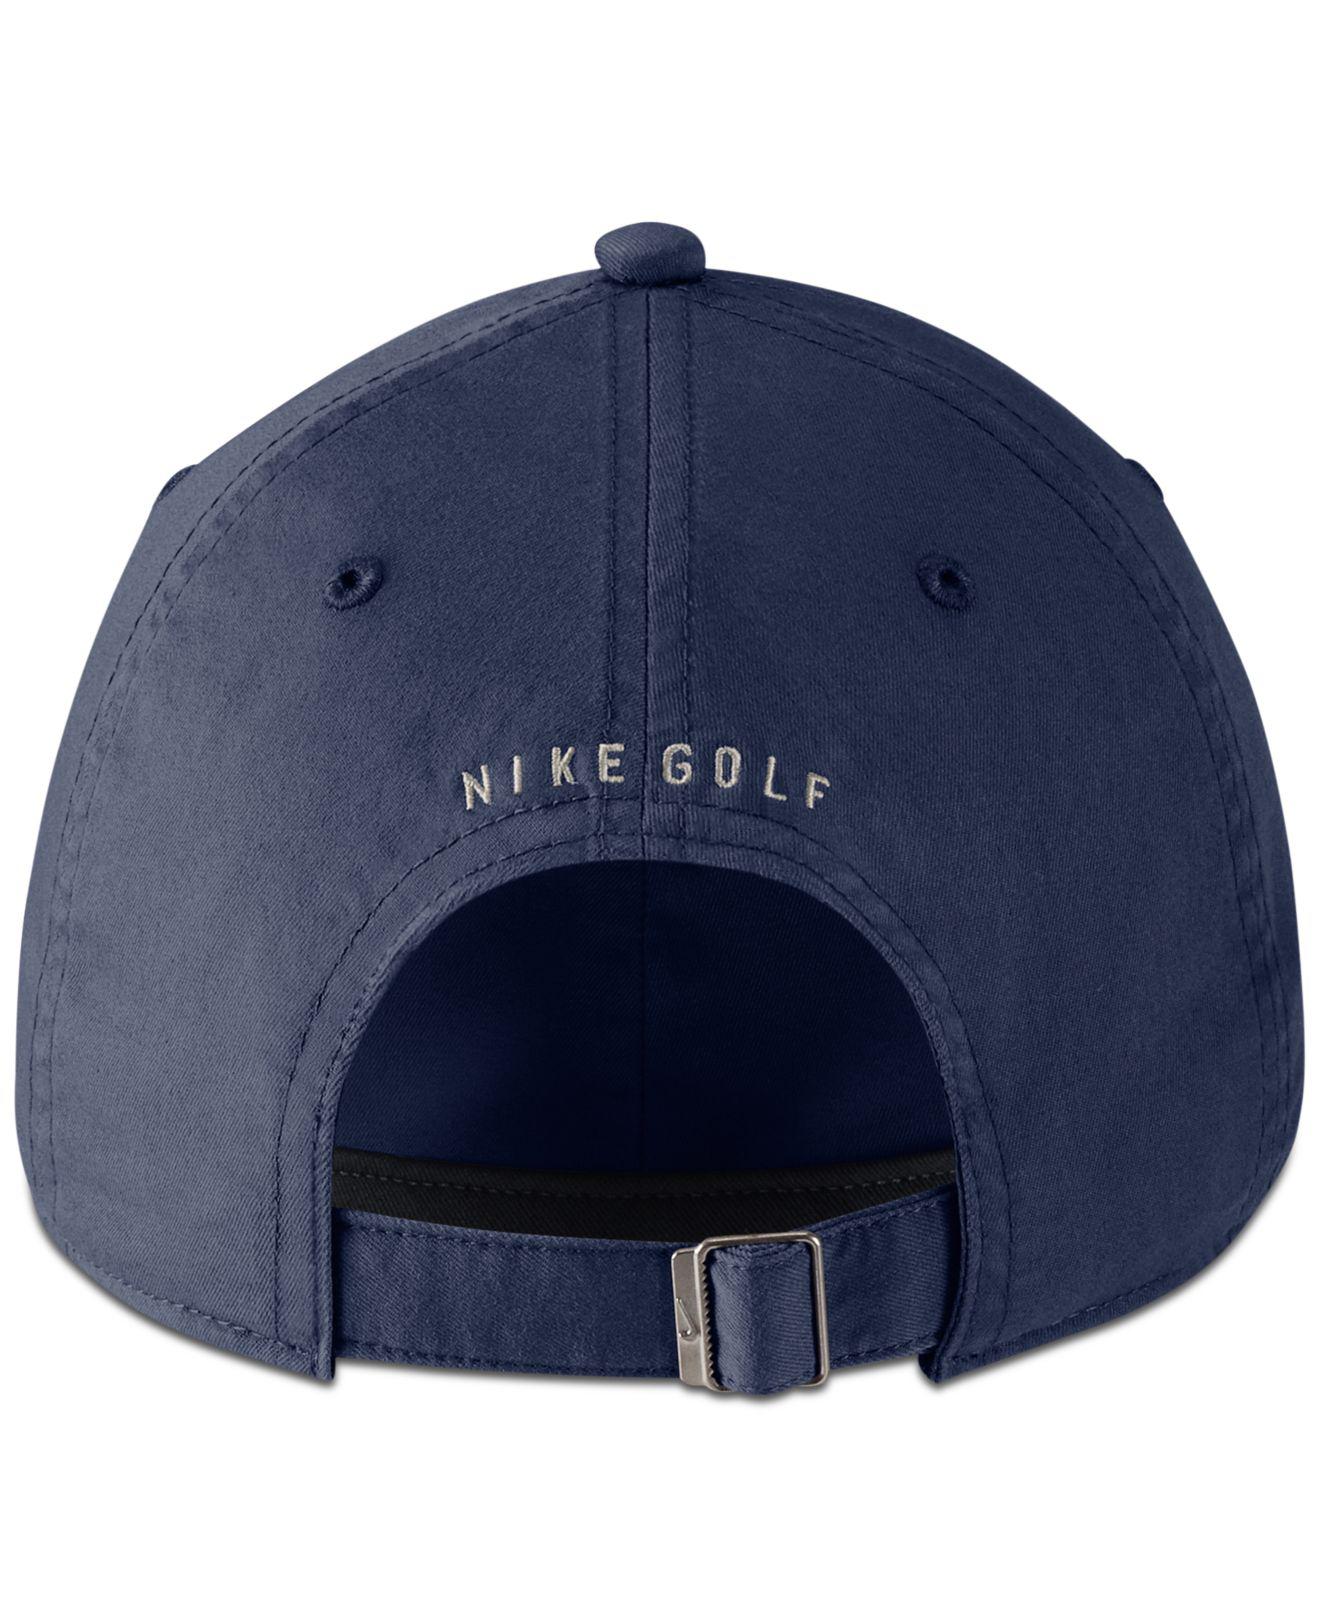 Nike Cotton Heritage86 Golf Hat in Midnight Navy/White (Blue) for Men - Lyst